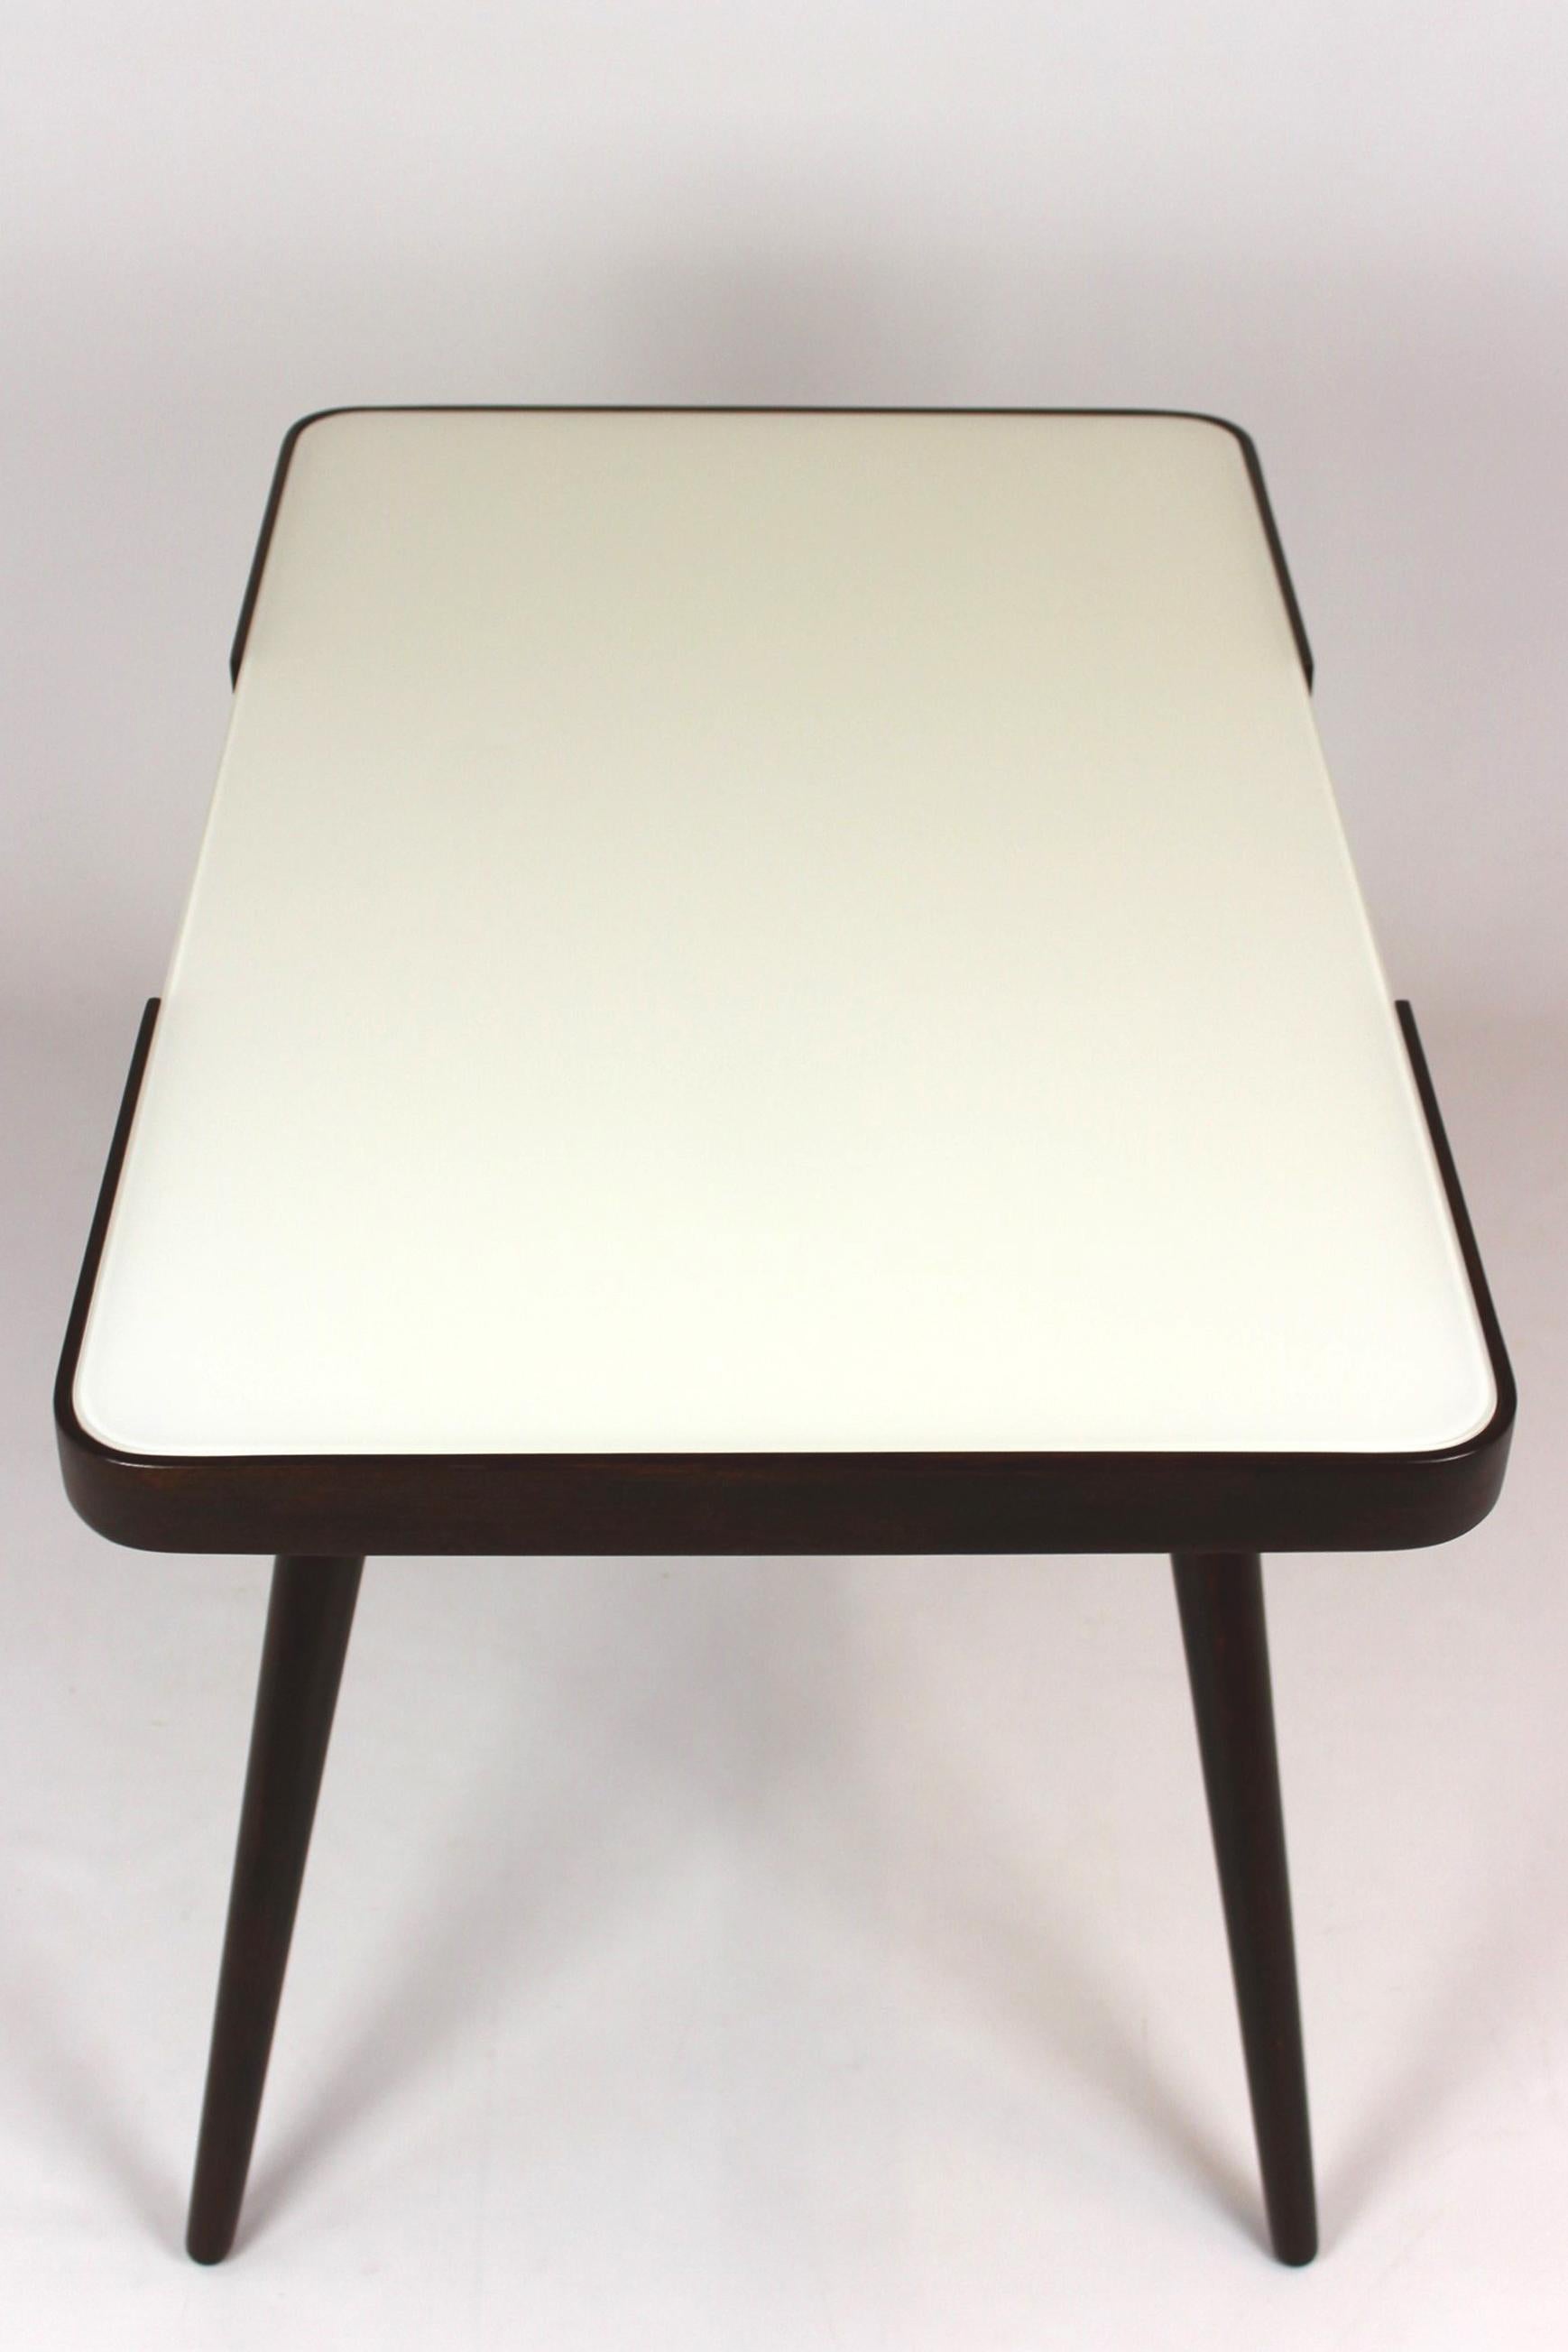 Restored Coffee Table with White Glass Top by J. Jiroutek for Int. Praha, 1960s For Sale 5